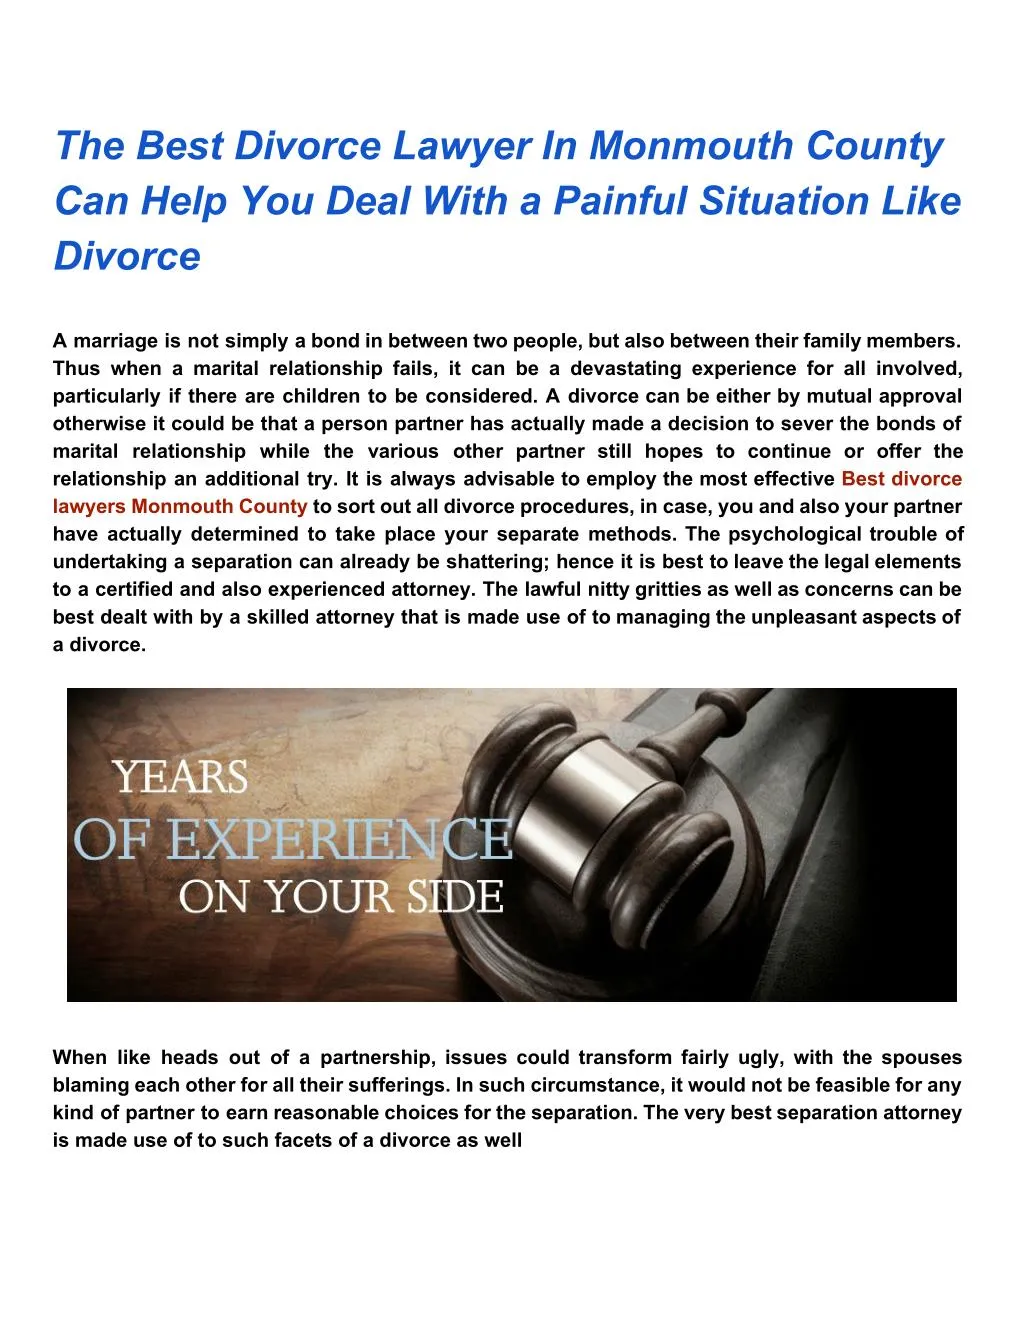 PPT The Best Divorce Lawyers In Monmouth County Can Help